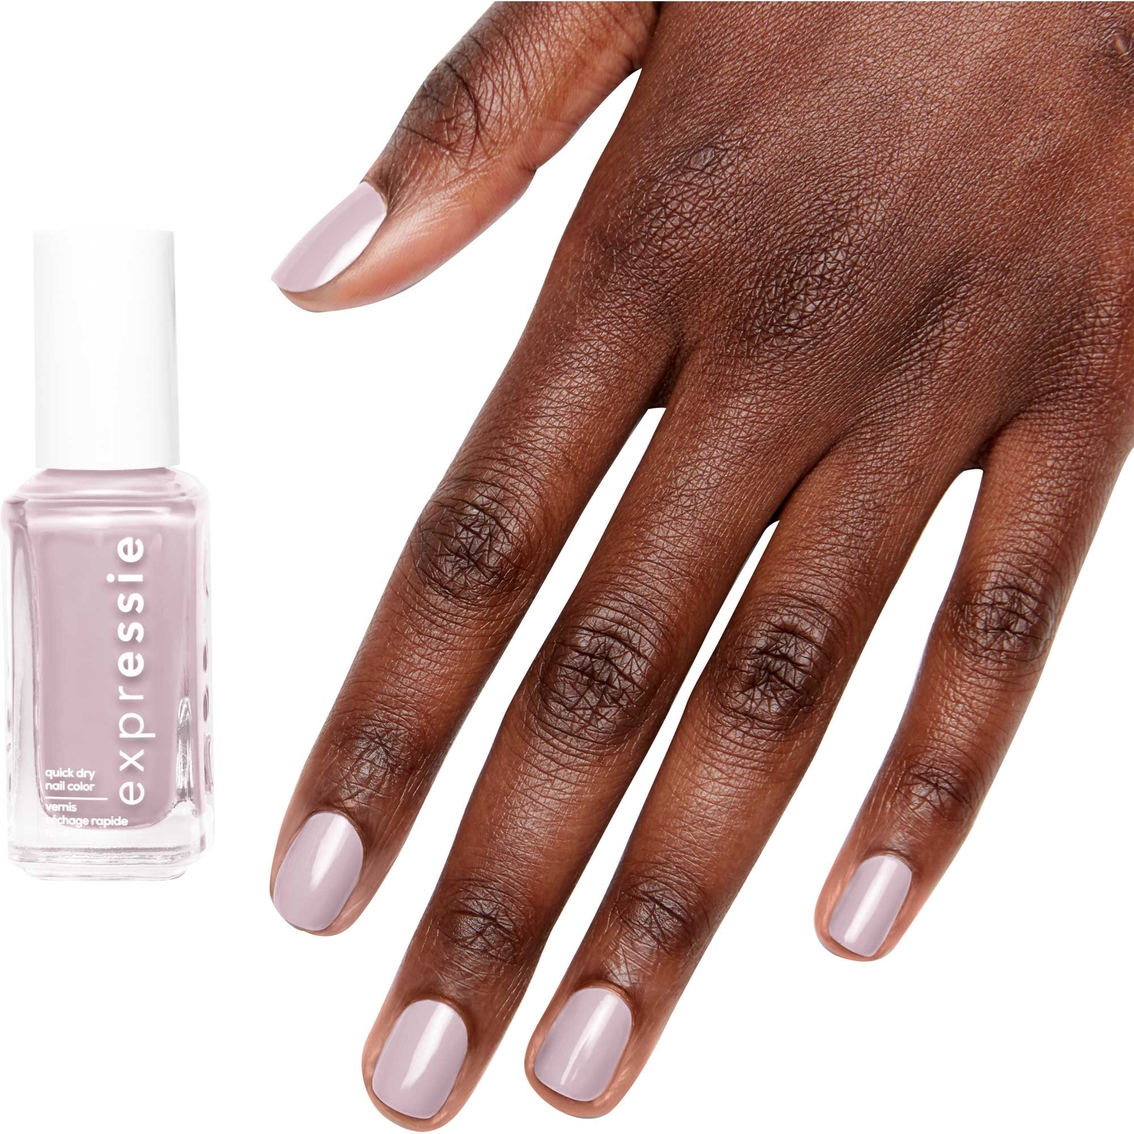 Essie Expressie Quick-dry Pink Crave The Chaos Nail Polish | Nail Polish |  Beauty & Health | Shop The Exchange